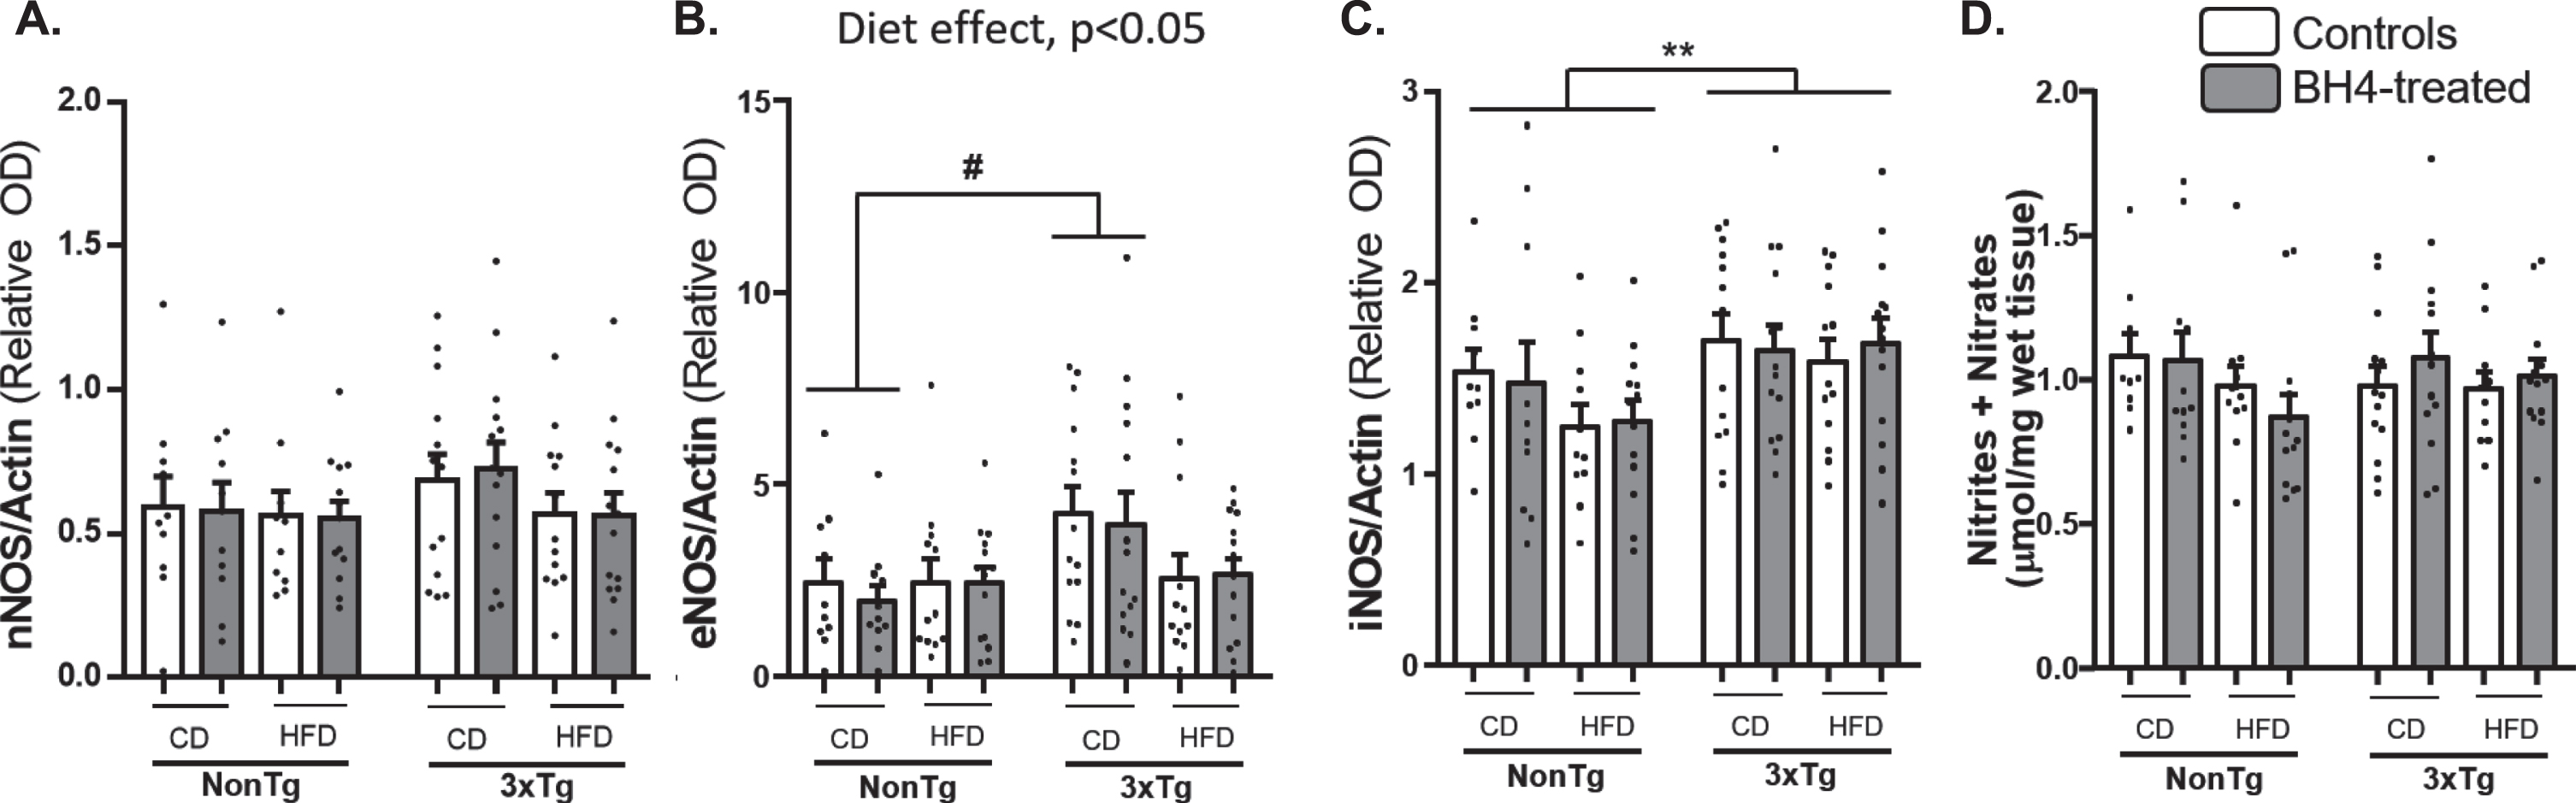 NOSs expression and total nitrites+nitrates. nNOS (A), eNOS (B), and iNOS (C) proteins content were measured by Western Blotting in hippocampus. Total nitrites and nitrates (D) were measured in parieto-temporal cortex of 3xTg-AD and NonTg mice and expressed as μmol/mg of wet tissue. Values are expressed as mean±SEM with N = 10–14/group. Statistical analyses: #p < 0.05 (Multimodal ANOVA, interaction Genotype x Diet); **p < 0.01, Genotype effect (Multimodal ANOVA).